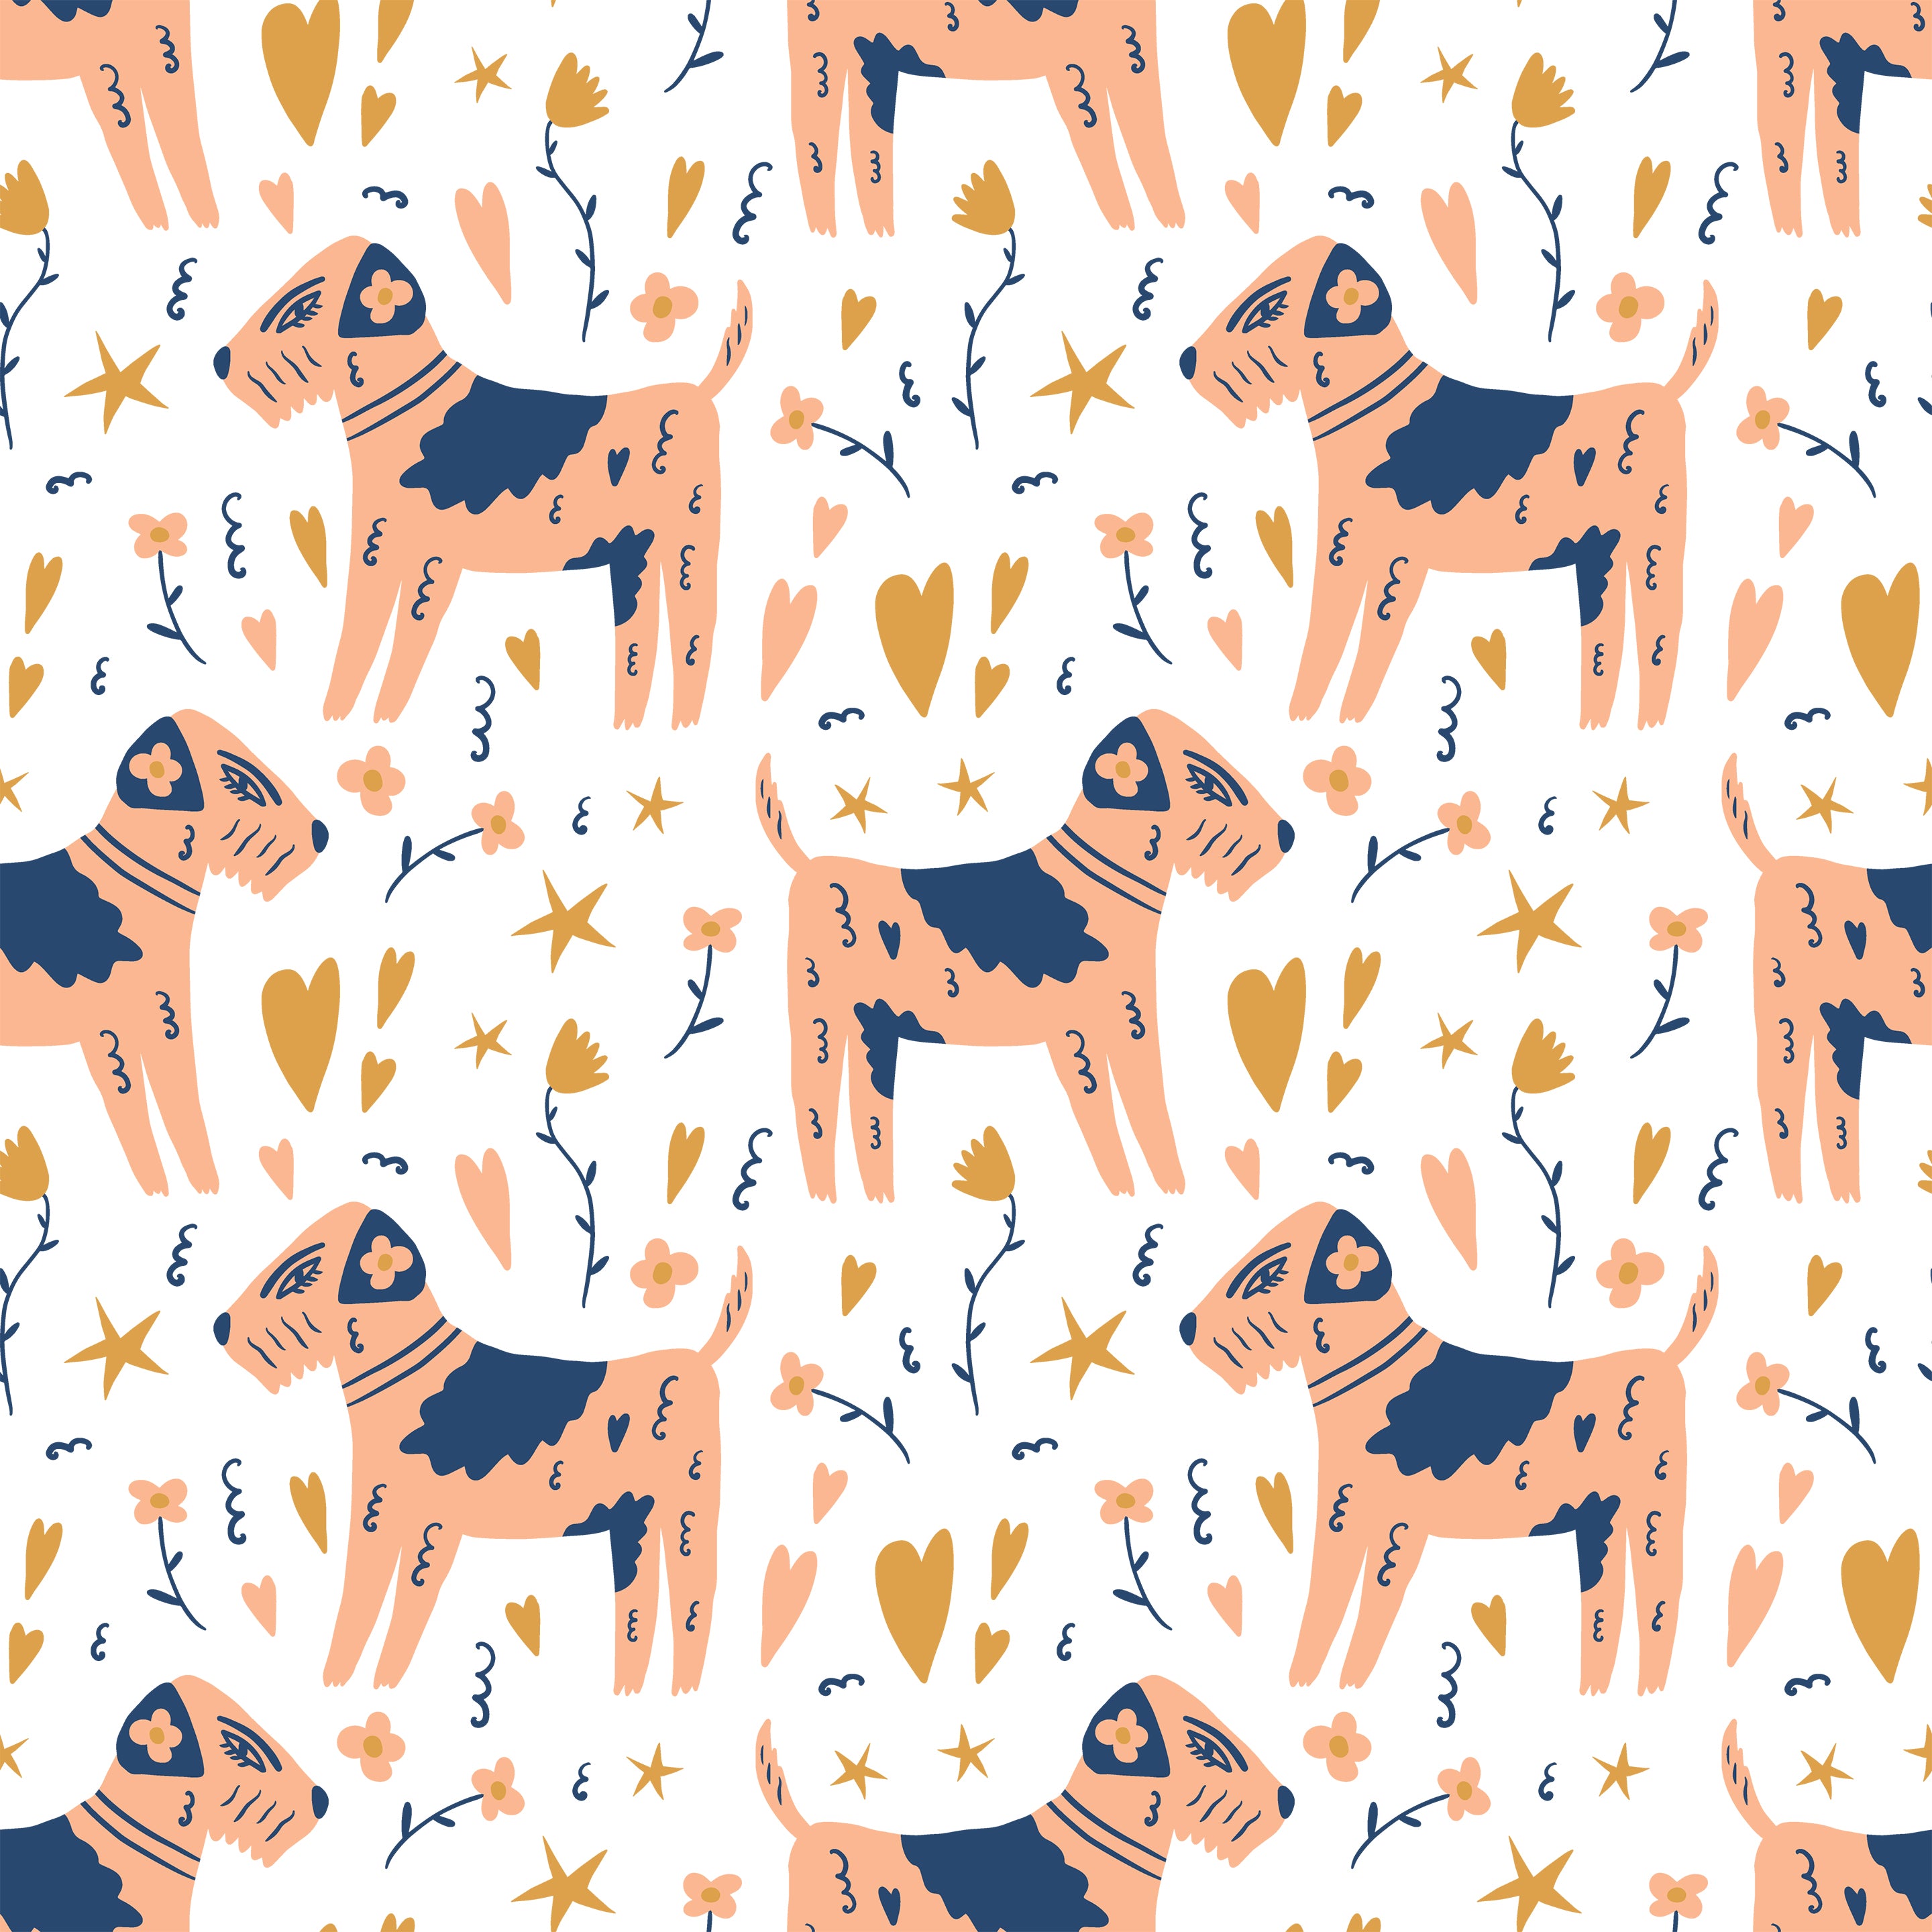 Artistic and playful wallpaper pattern from 'Dog Wallpaper 38' featuring peach-colored dogs surrounded by whimsical floral and celestial elements on a white background. The vibrant stars, hearts, and botanical motifs add a magical touch, perfect for any child's room or creative space.